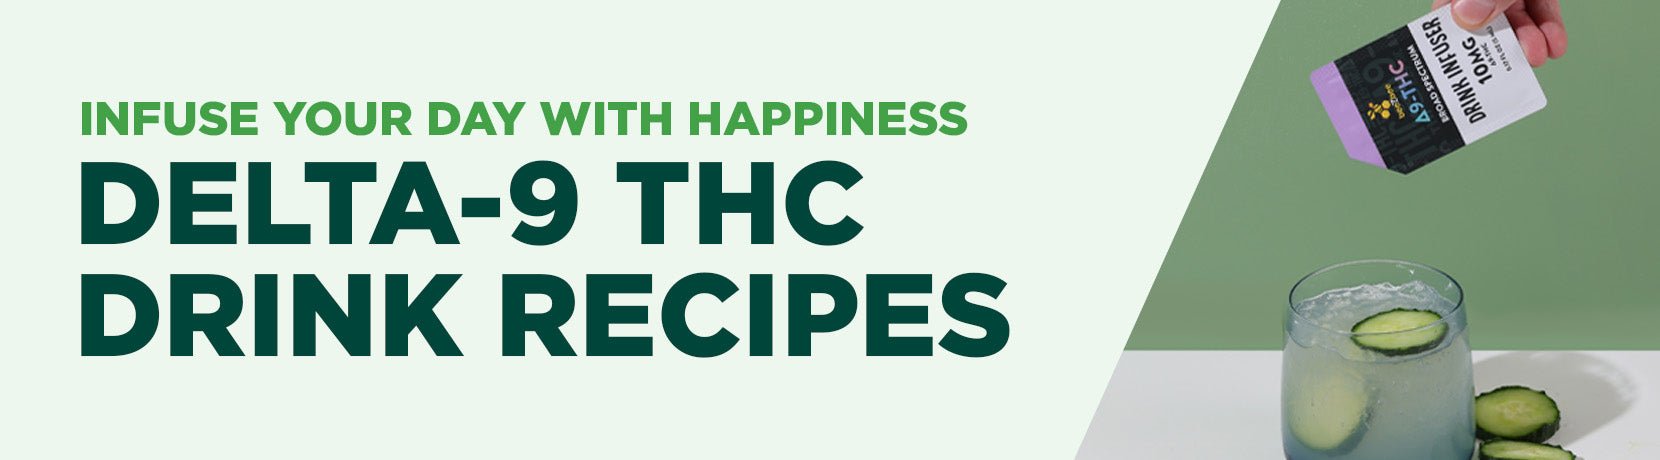 Infuse your day with happiness: Delta-9 THC Drink Recipes - Shop CBD Kratom